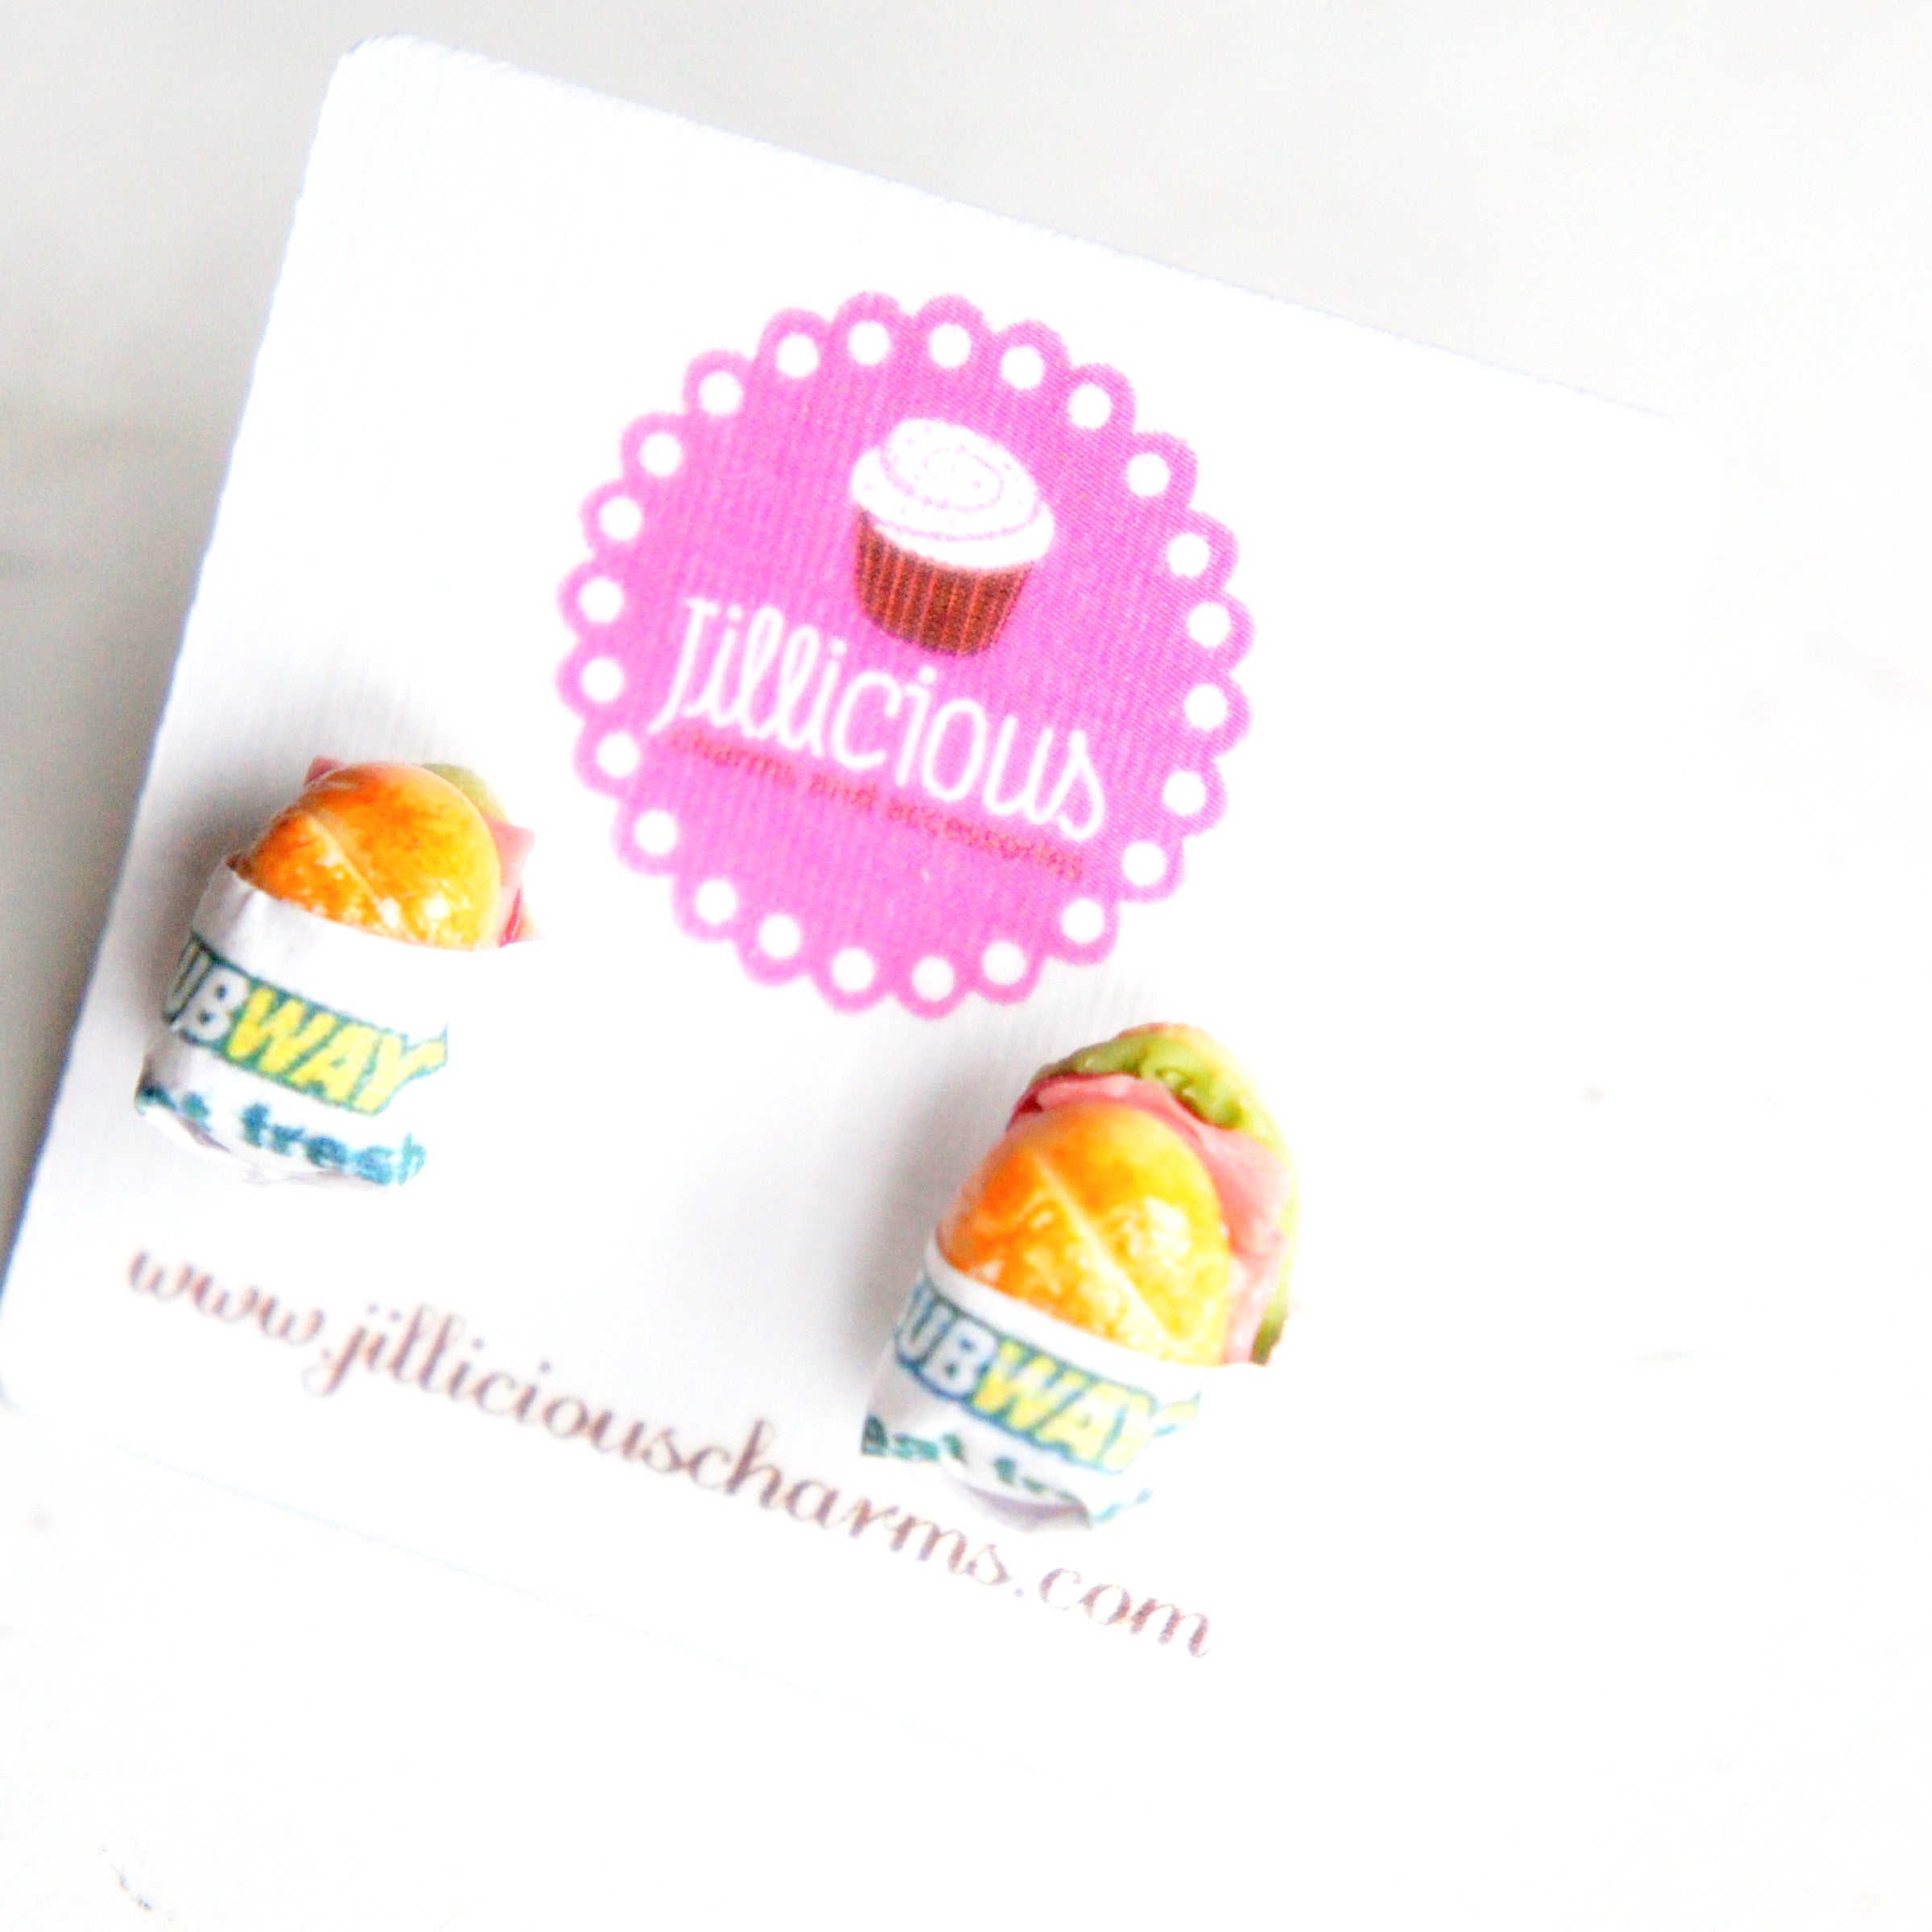 Subway Sandwich Stud Earrings - Jillicious charms and accessories